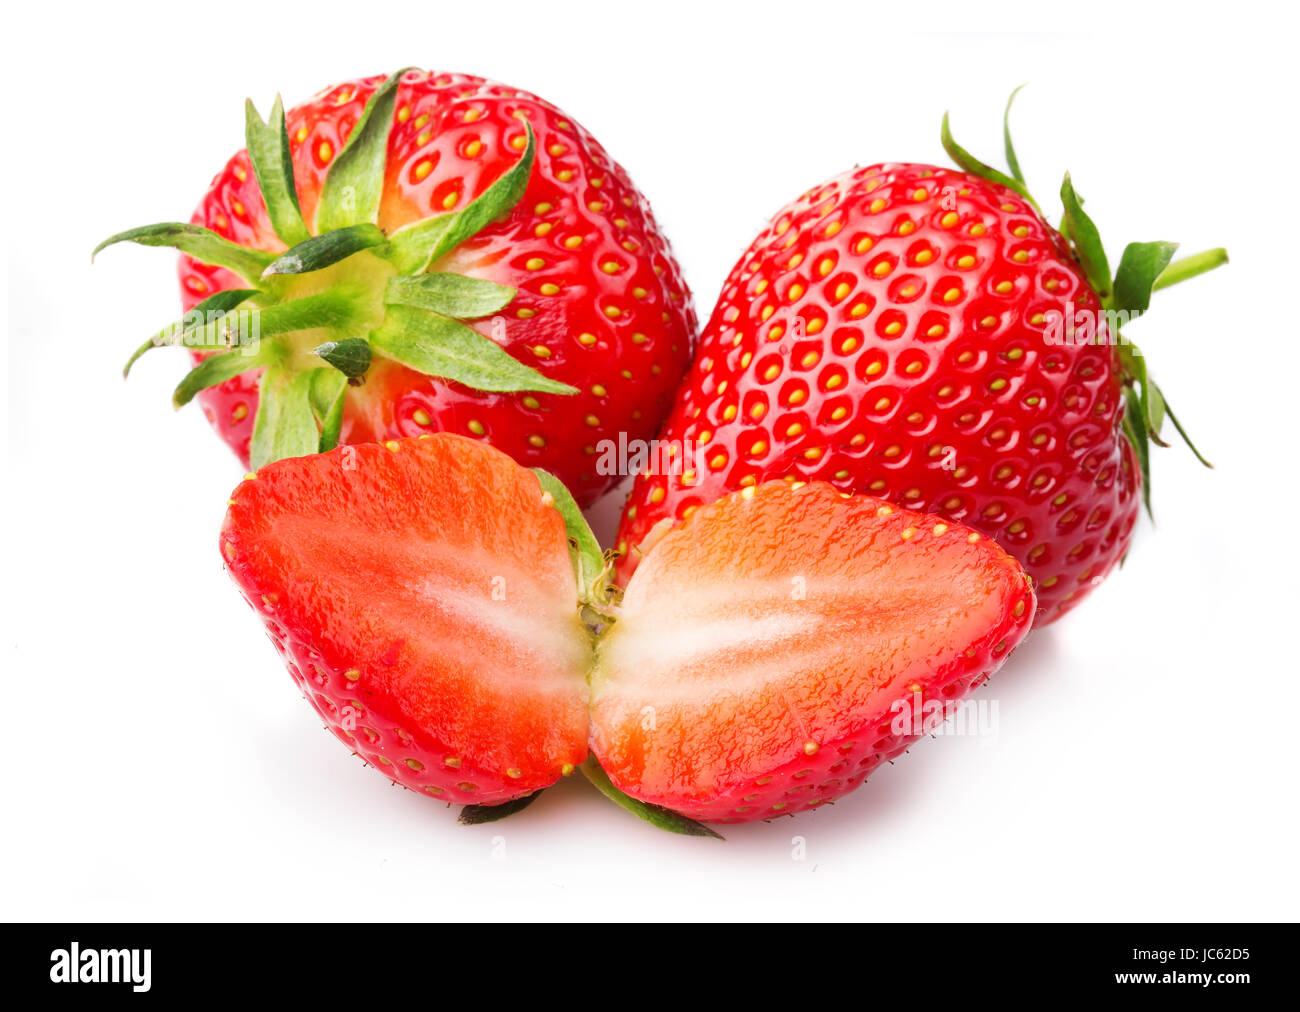 Strawberries with leaves and slices isolated on a white background Stock Photo